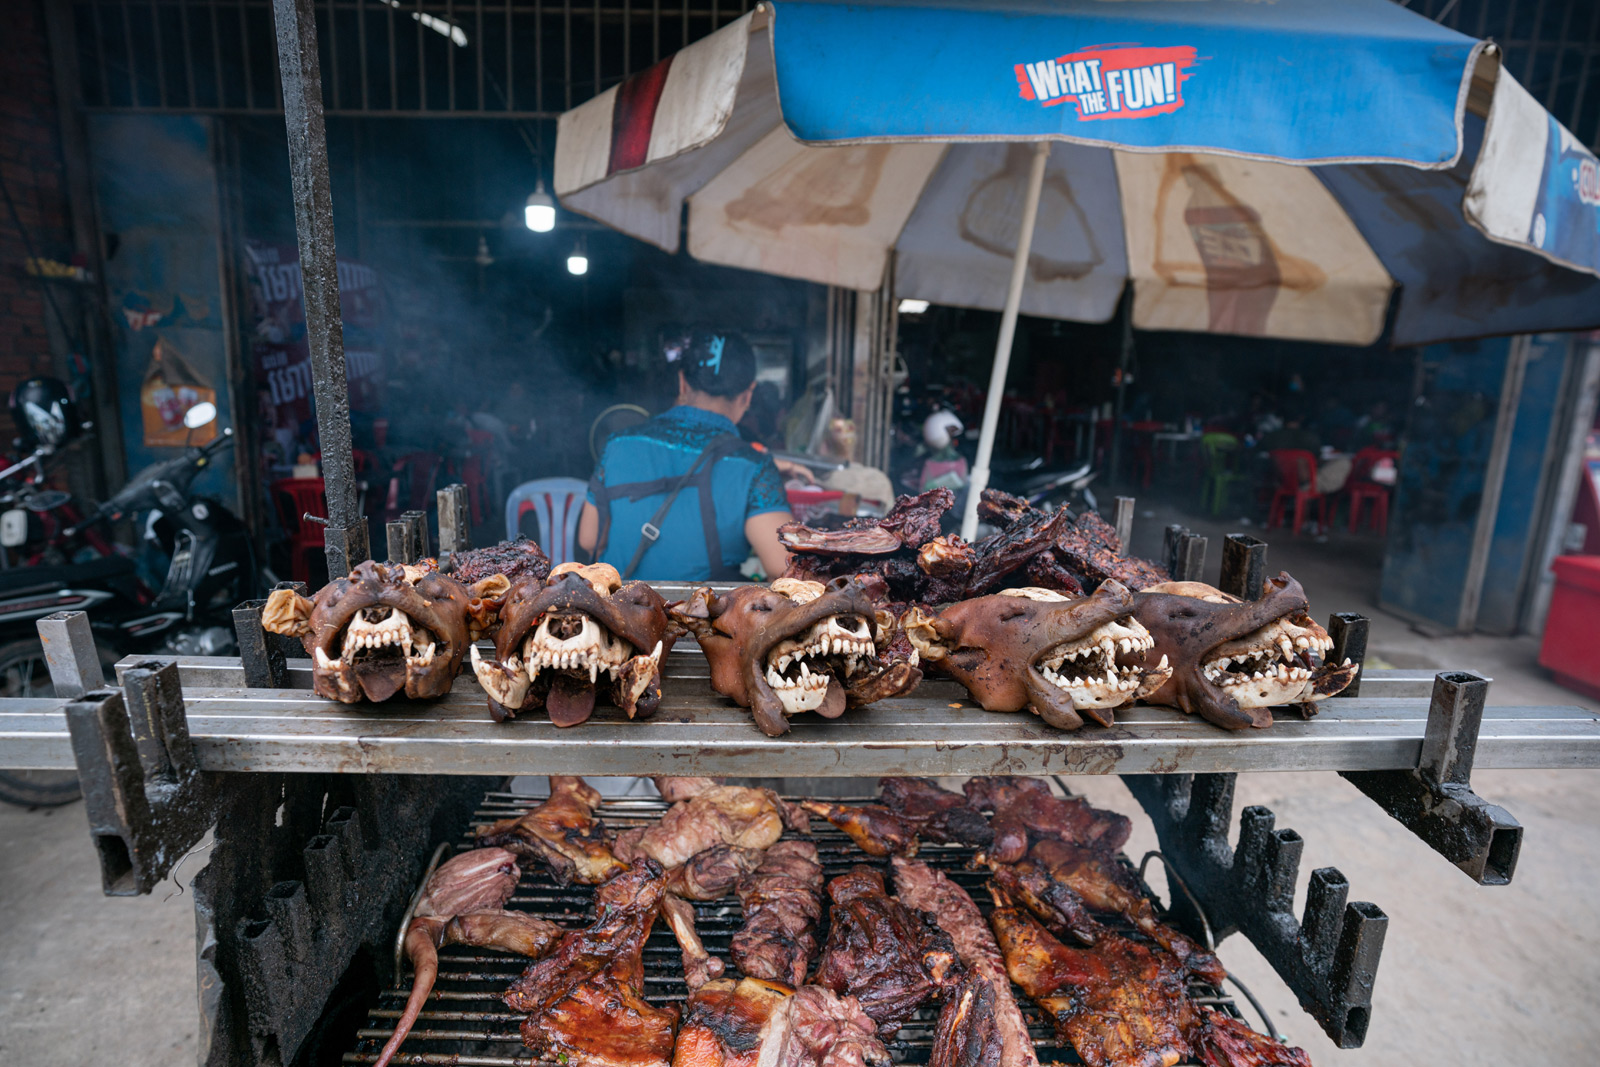 Dog heads and meat for sale in a roadside restaurant in Phnom Penh. Andy Ball